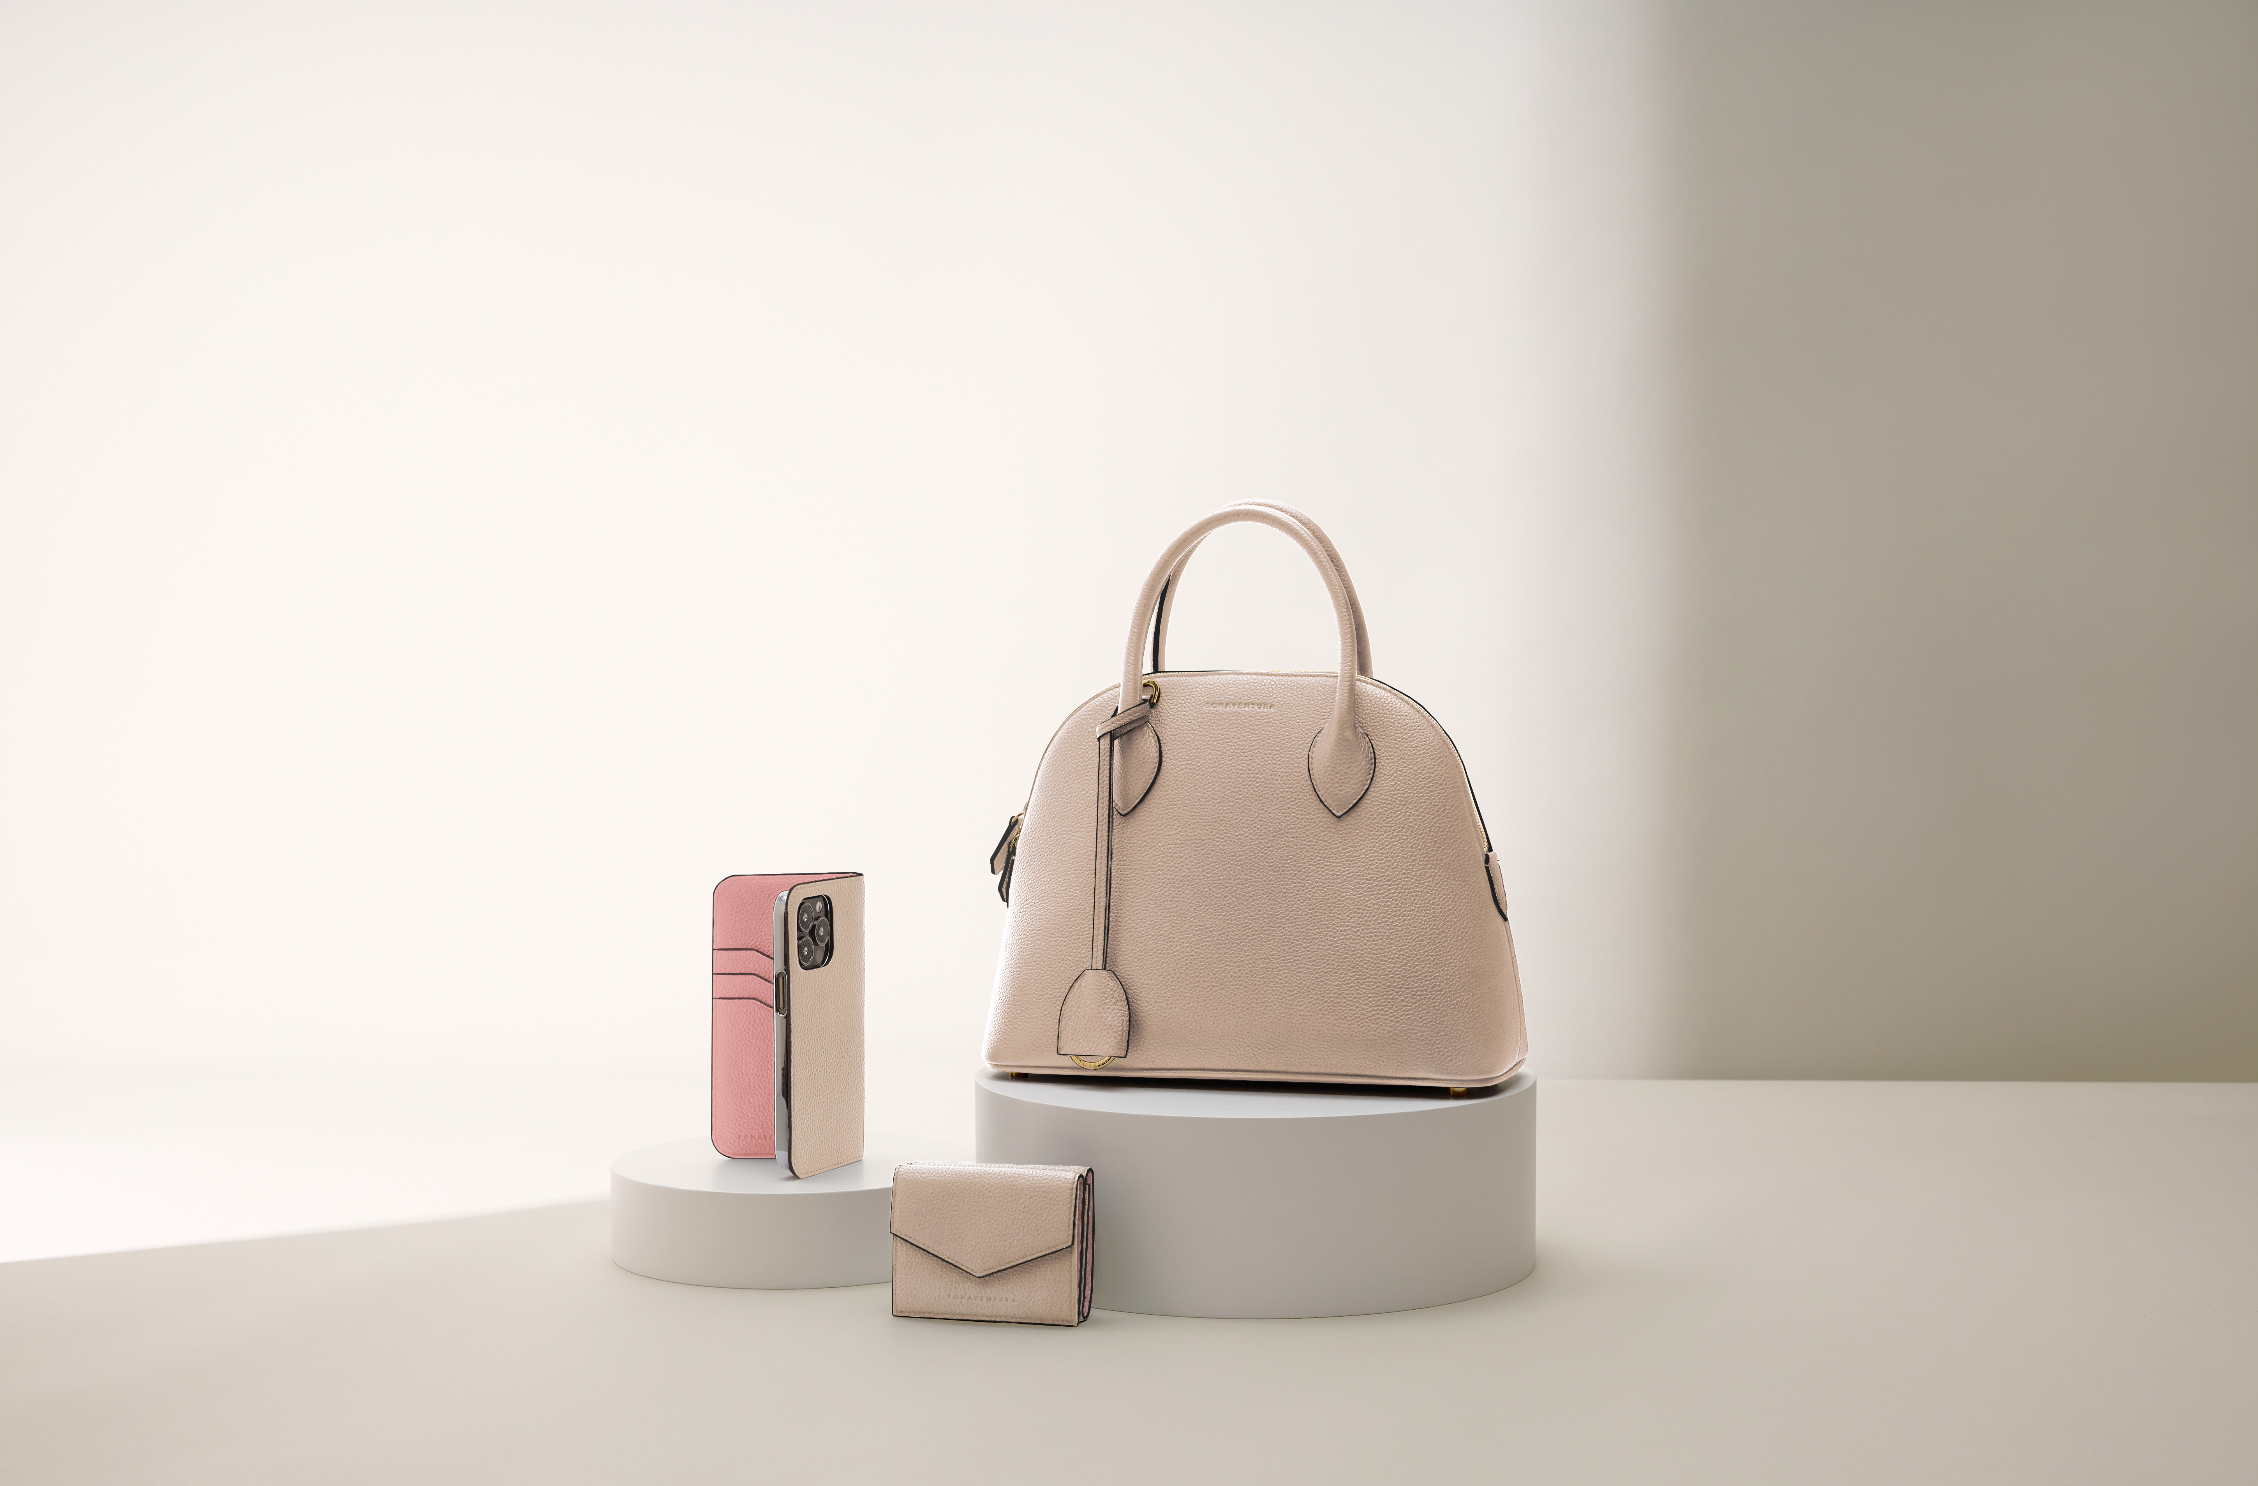 A selection of high-quality leather products from BONAVENTURA.